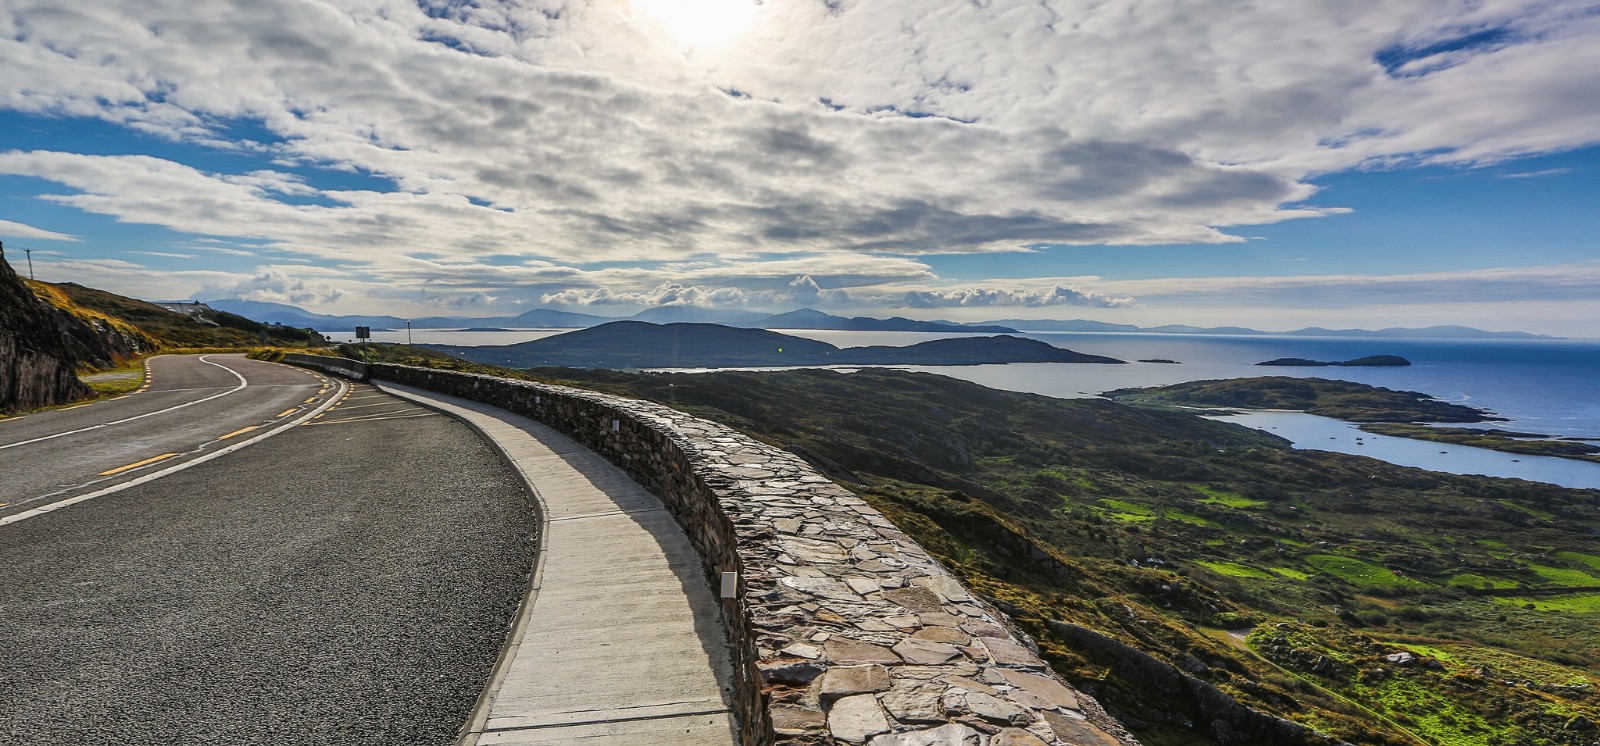 schotel huis Legende Ring of Kerry Guided or Self-Guided Hike - Ireland | Tripsite